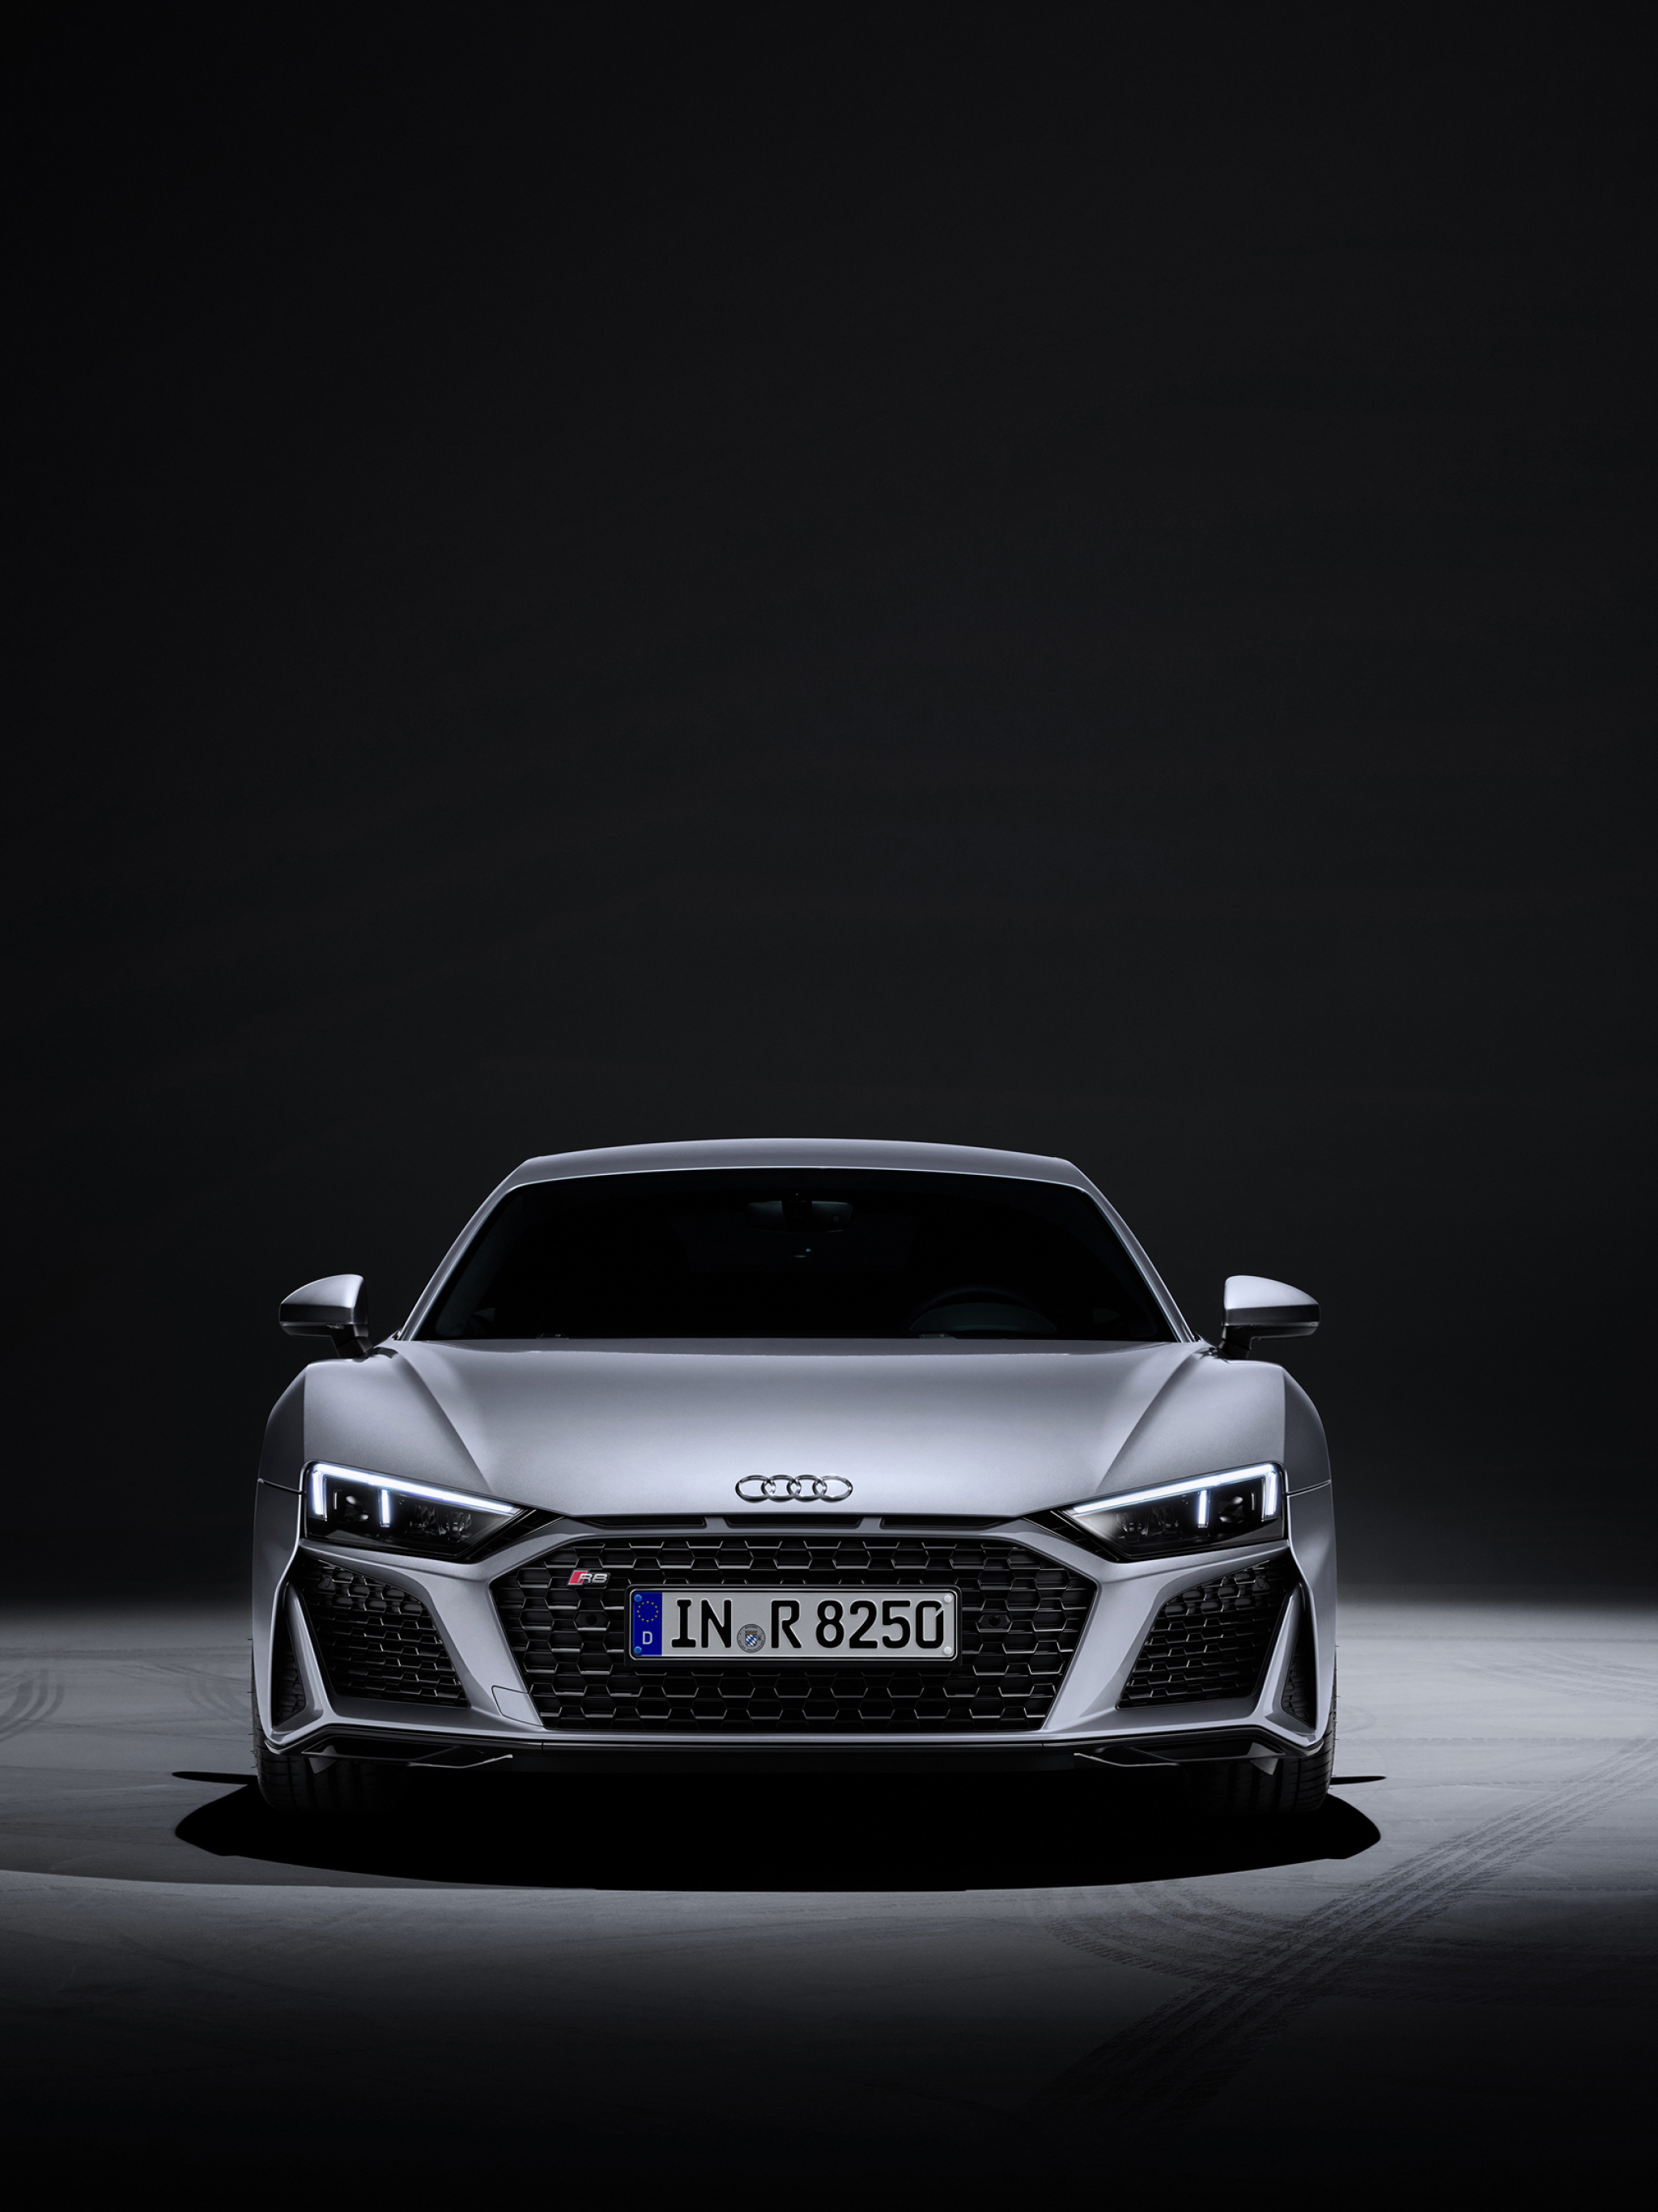 2048x2732 Audi R8 V10 2048x2732 Resolution Wallpaper Hd Cars 4k Wallpapers Images Photos And Background Wallpapers Den